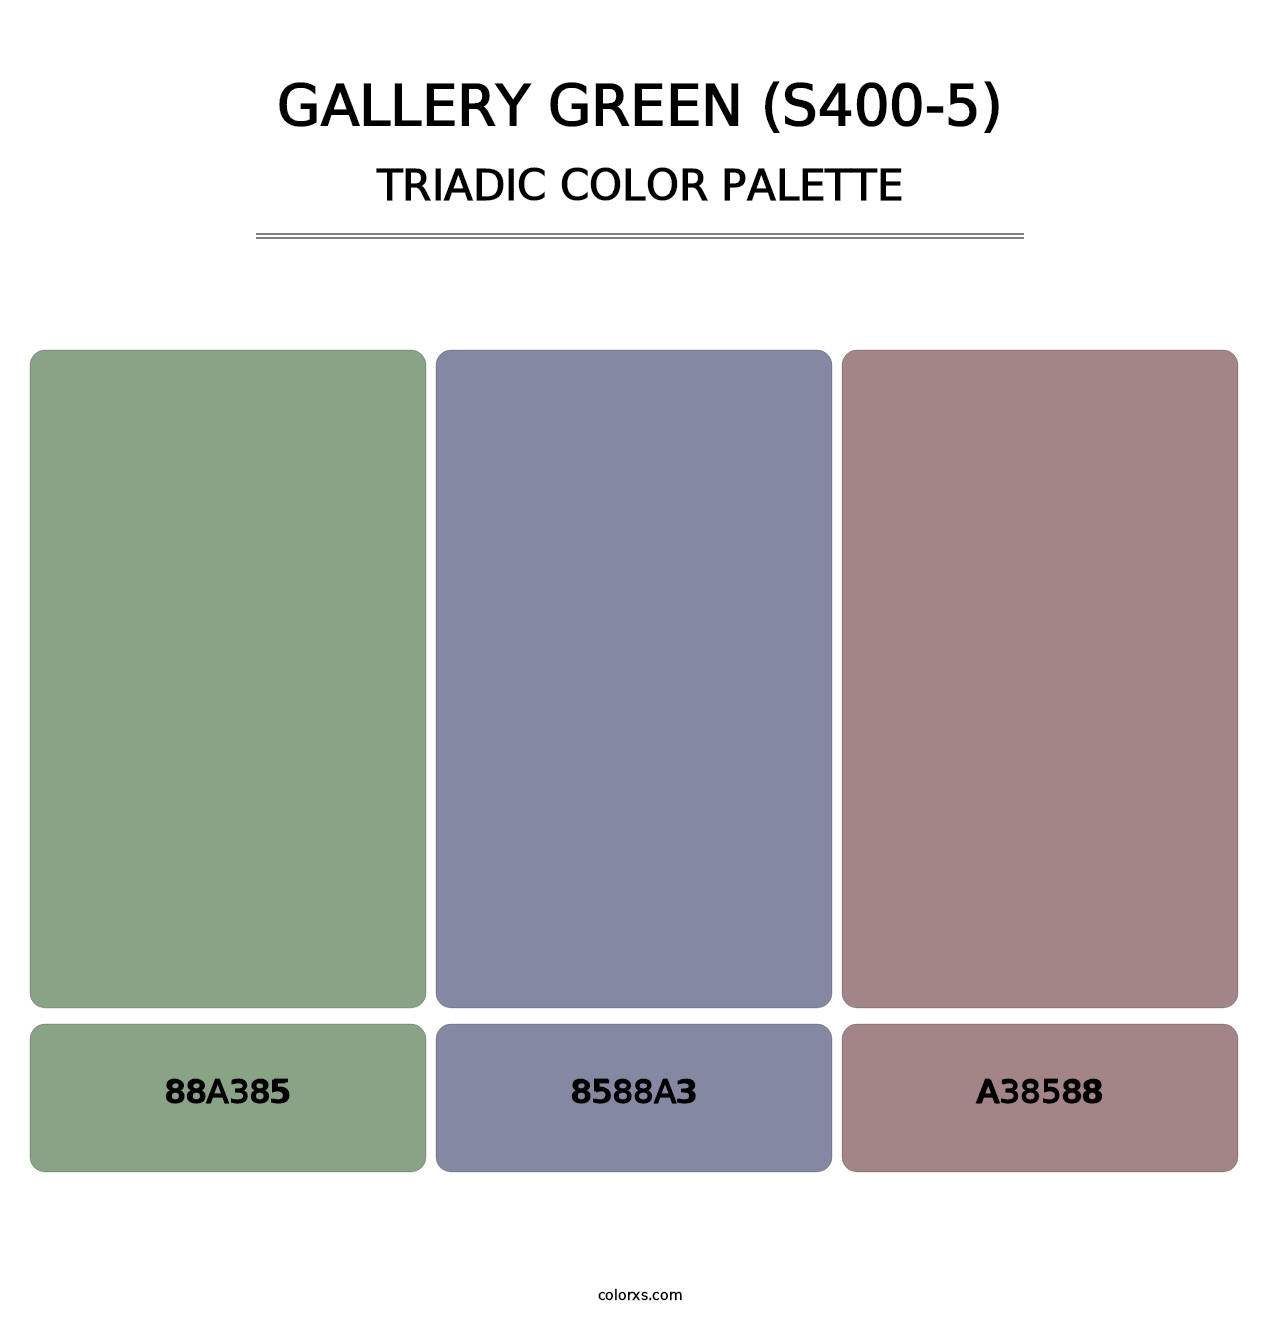 Gallery Green (S400-5) - Triadic Color Palette